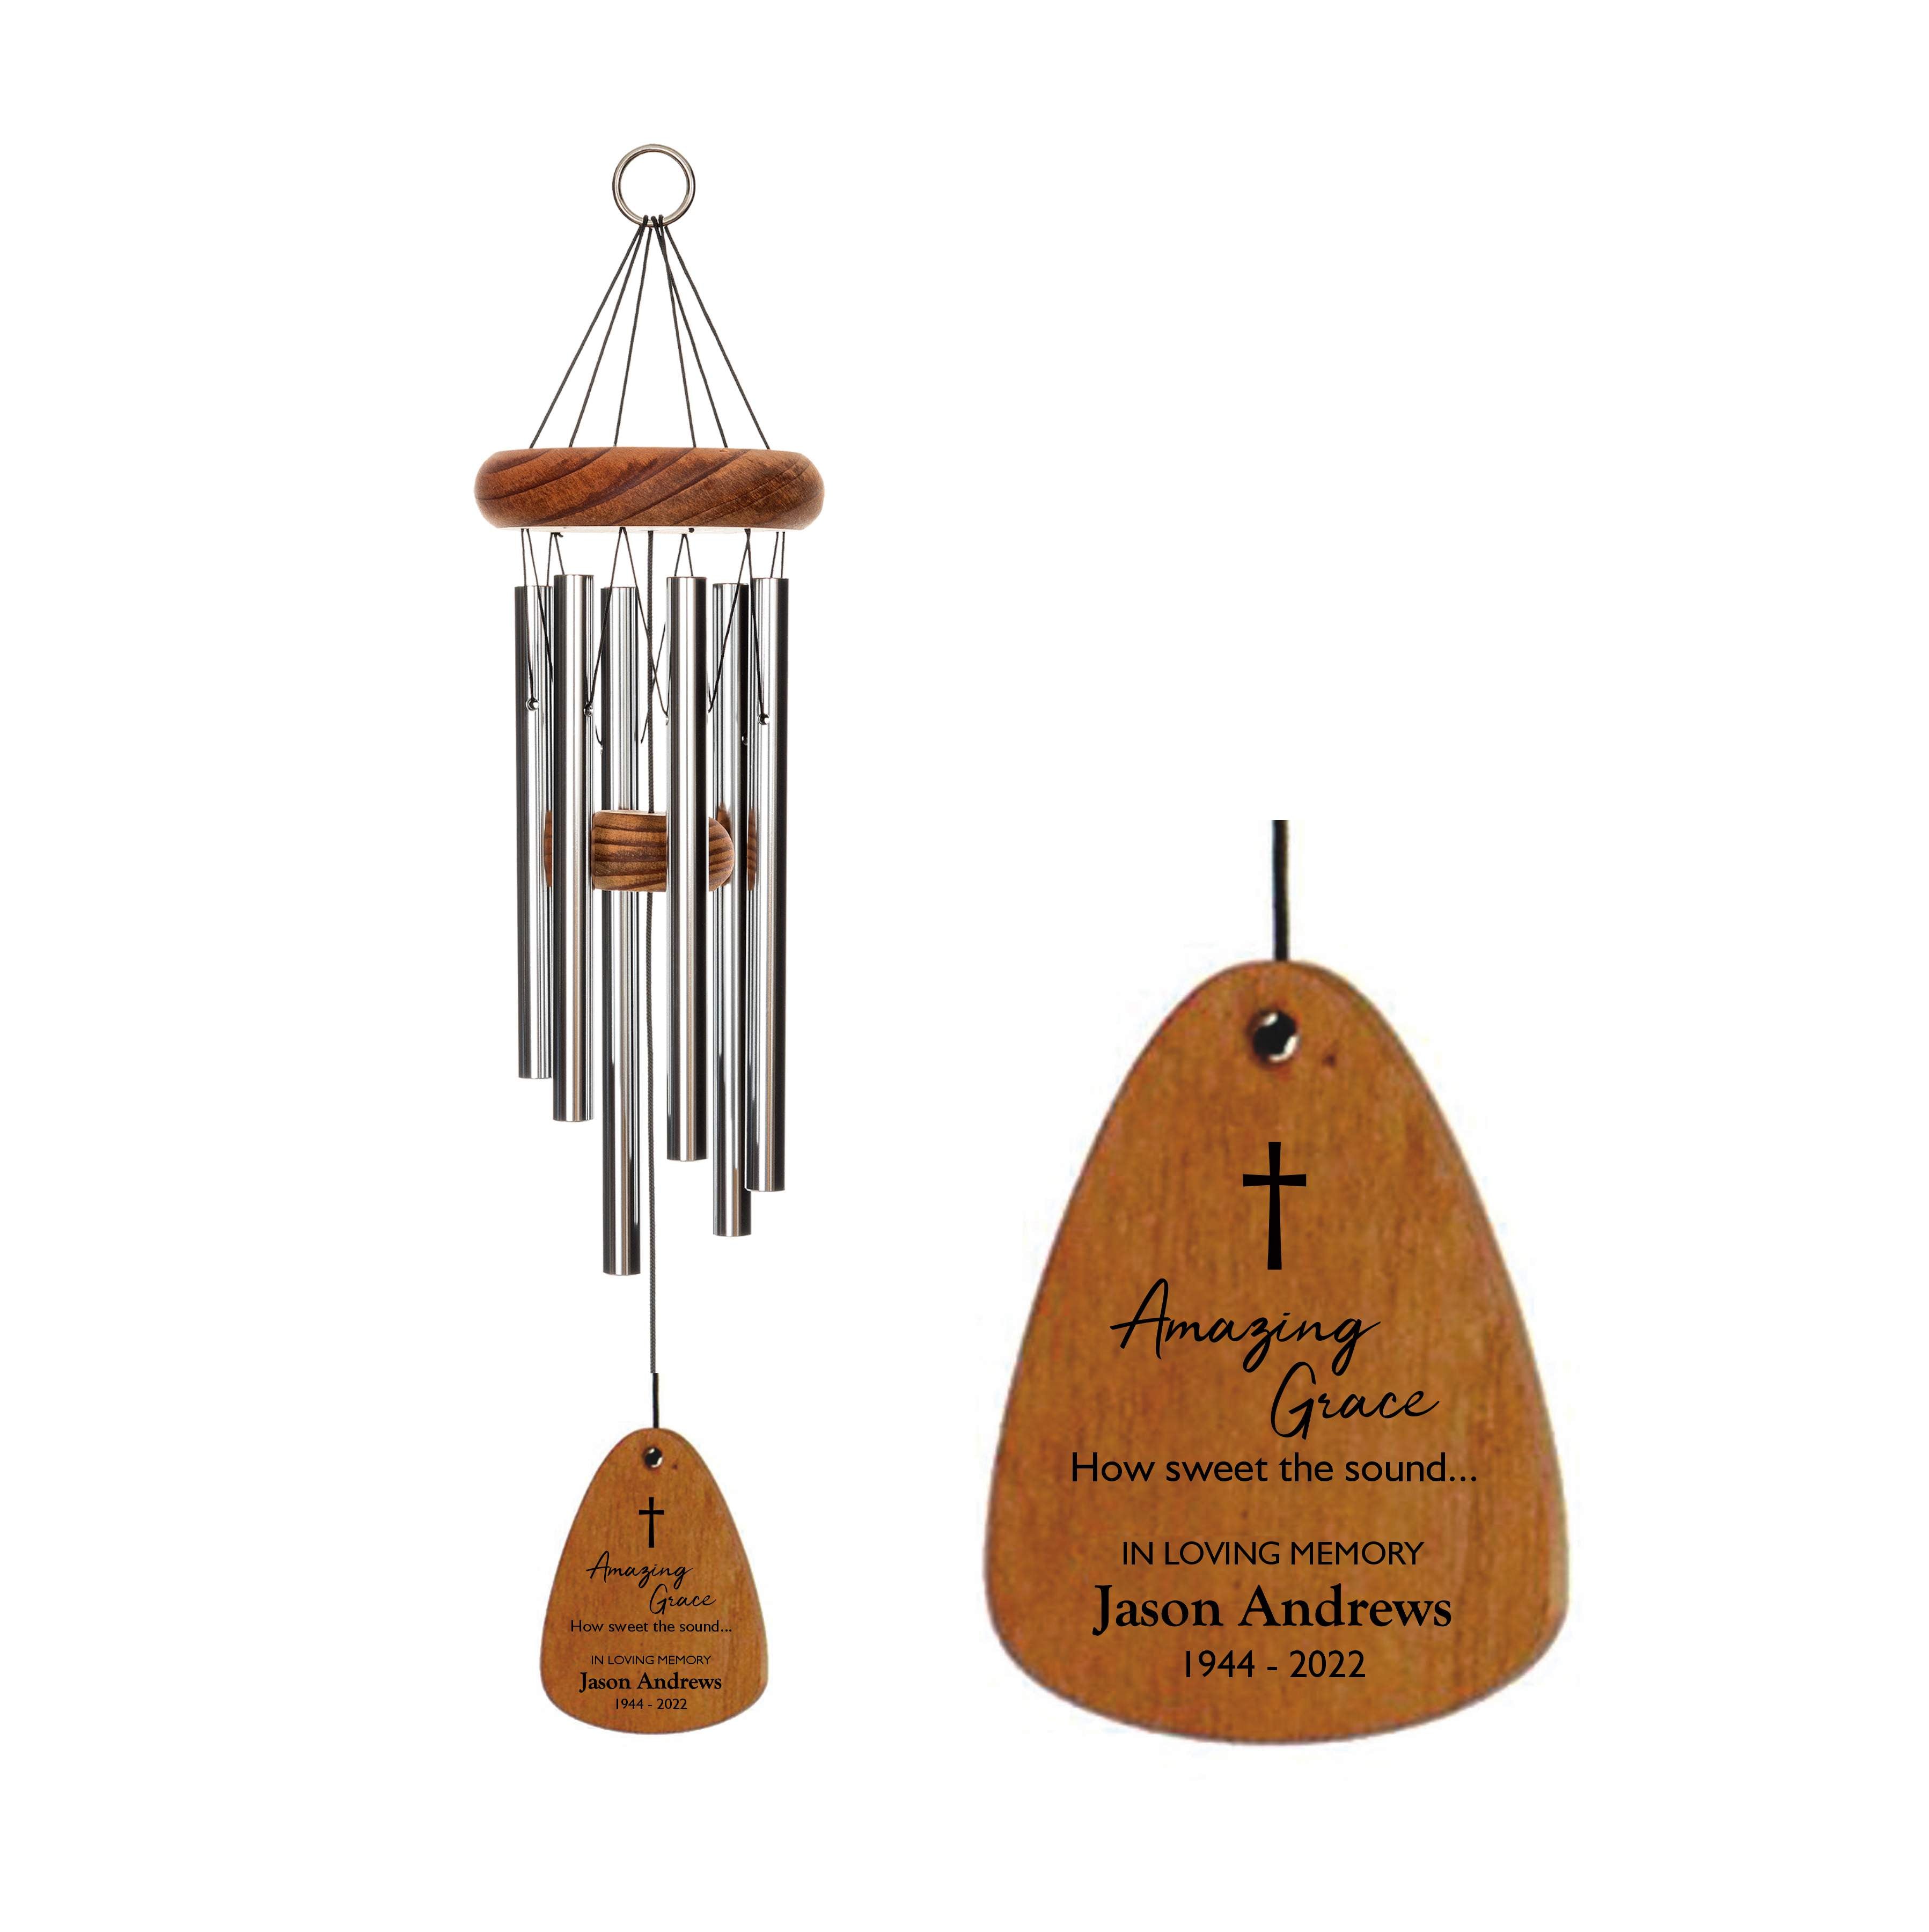 Personalized Amazing Grace Memorial Wind Chime | Sympathy Gift | Made in USA